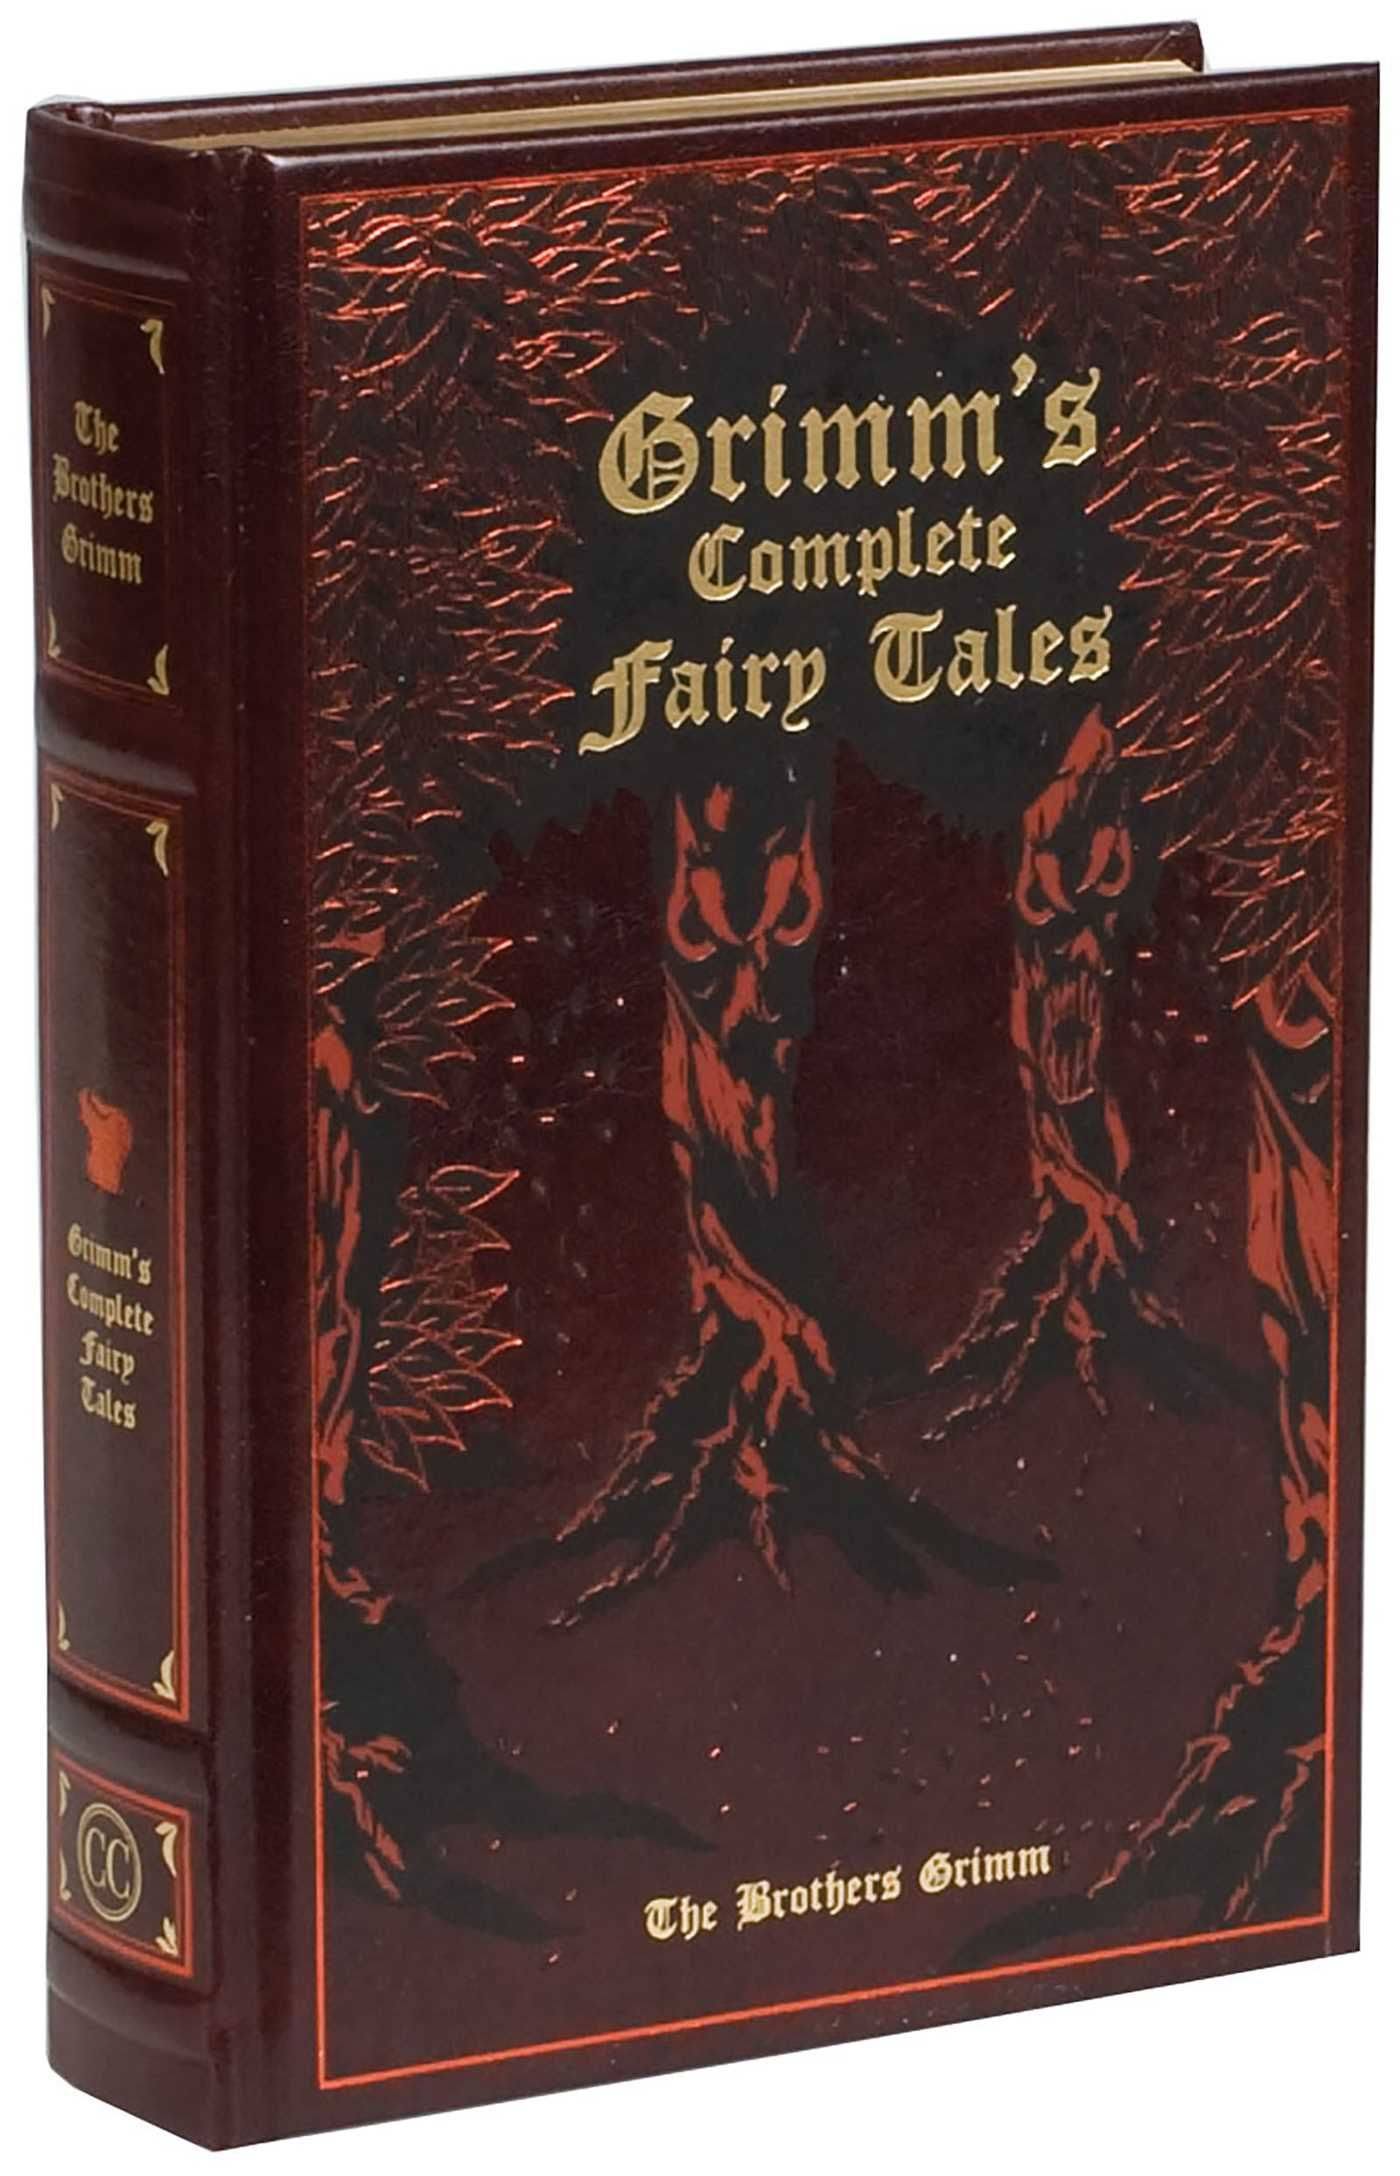 Grimms Complete Fairy Tales - The Brothers Grimm